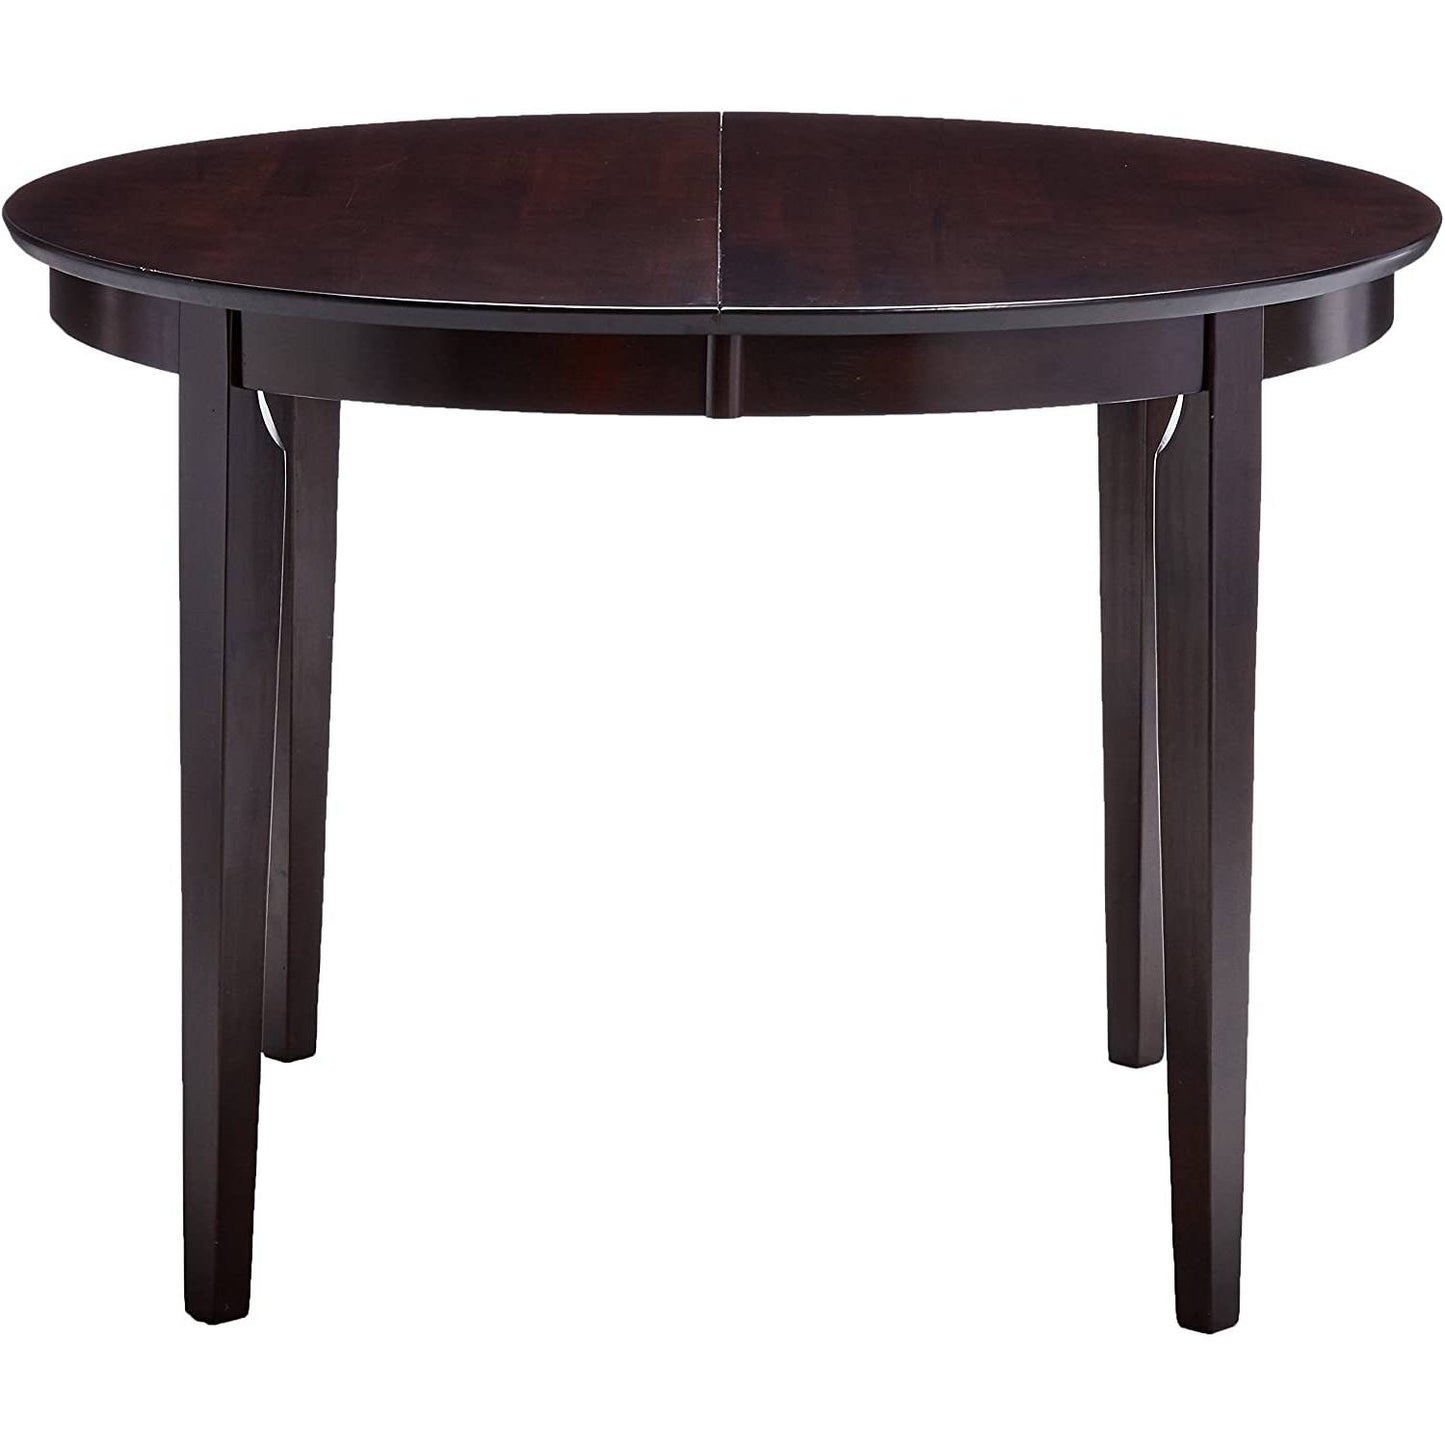 Dining > Dining Tables - Contemporary Oval Dining Table In Dark Brown Cappuccino Wood Finish